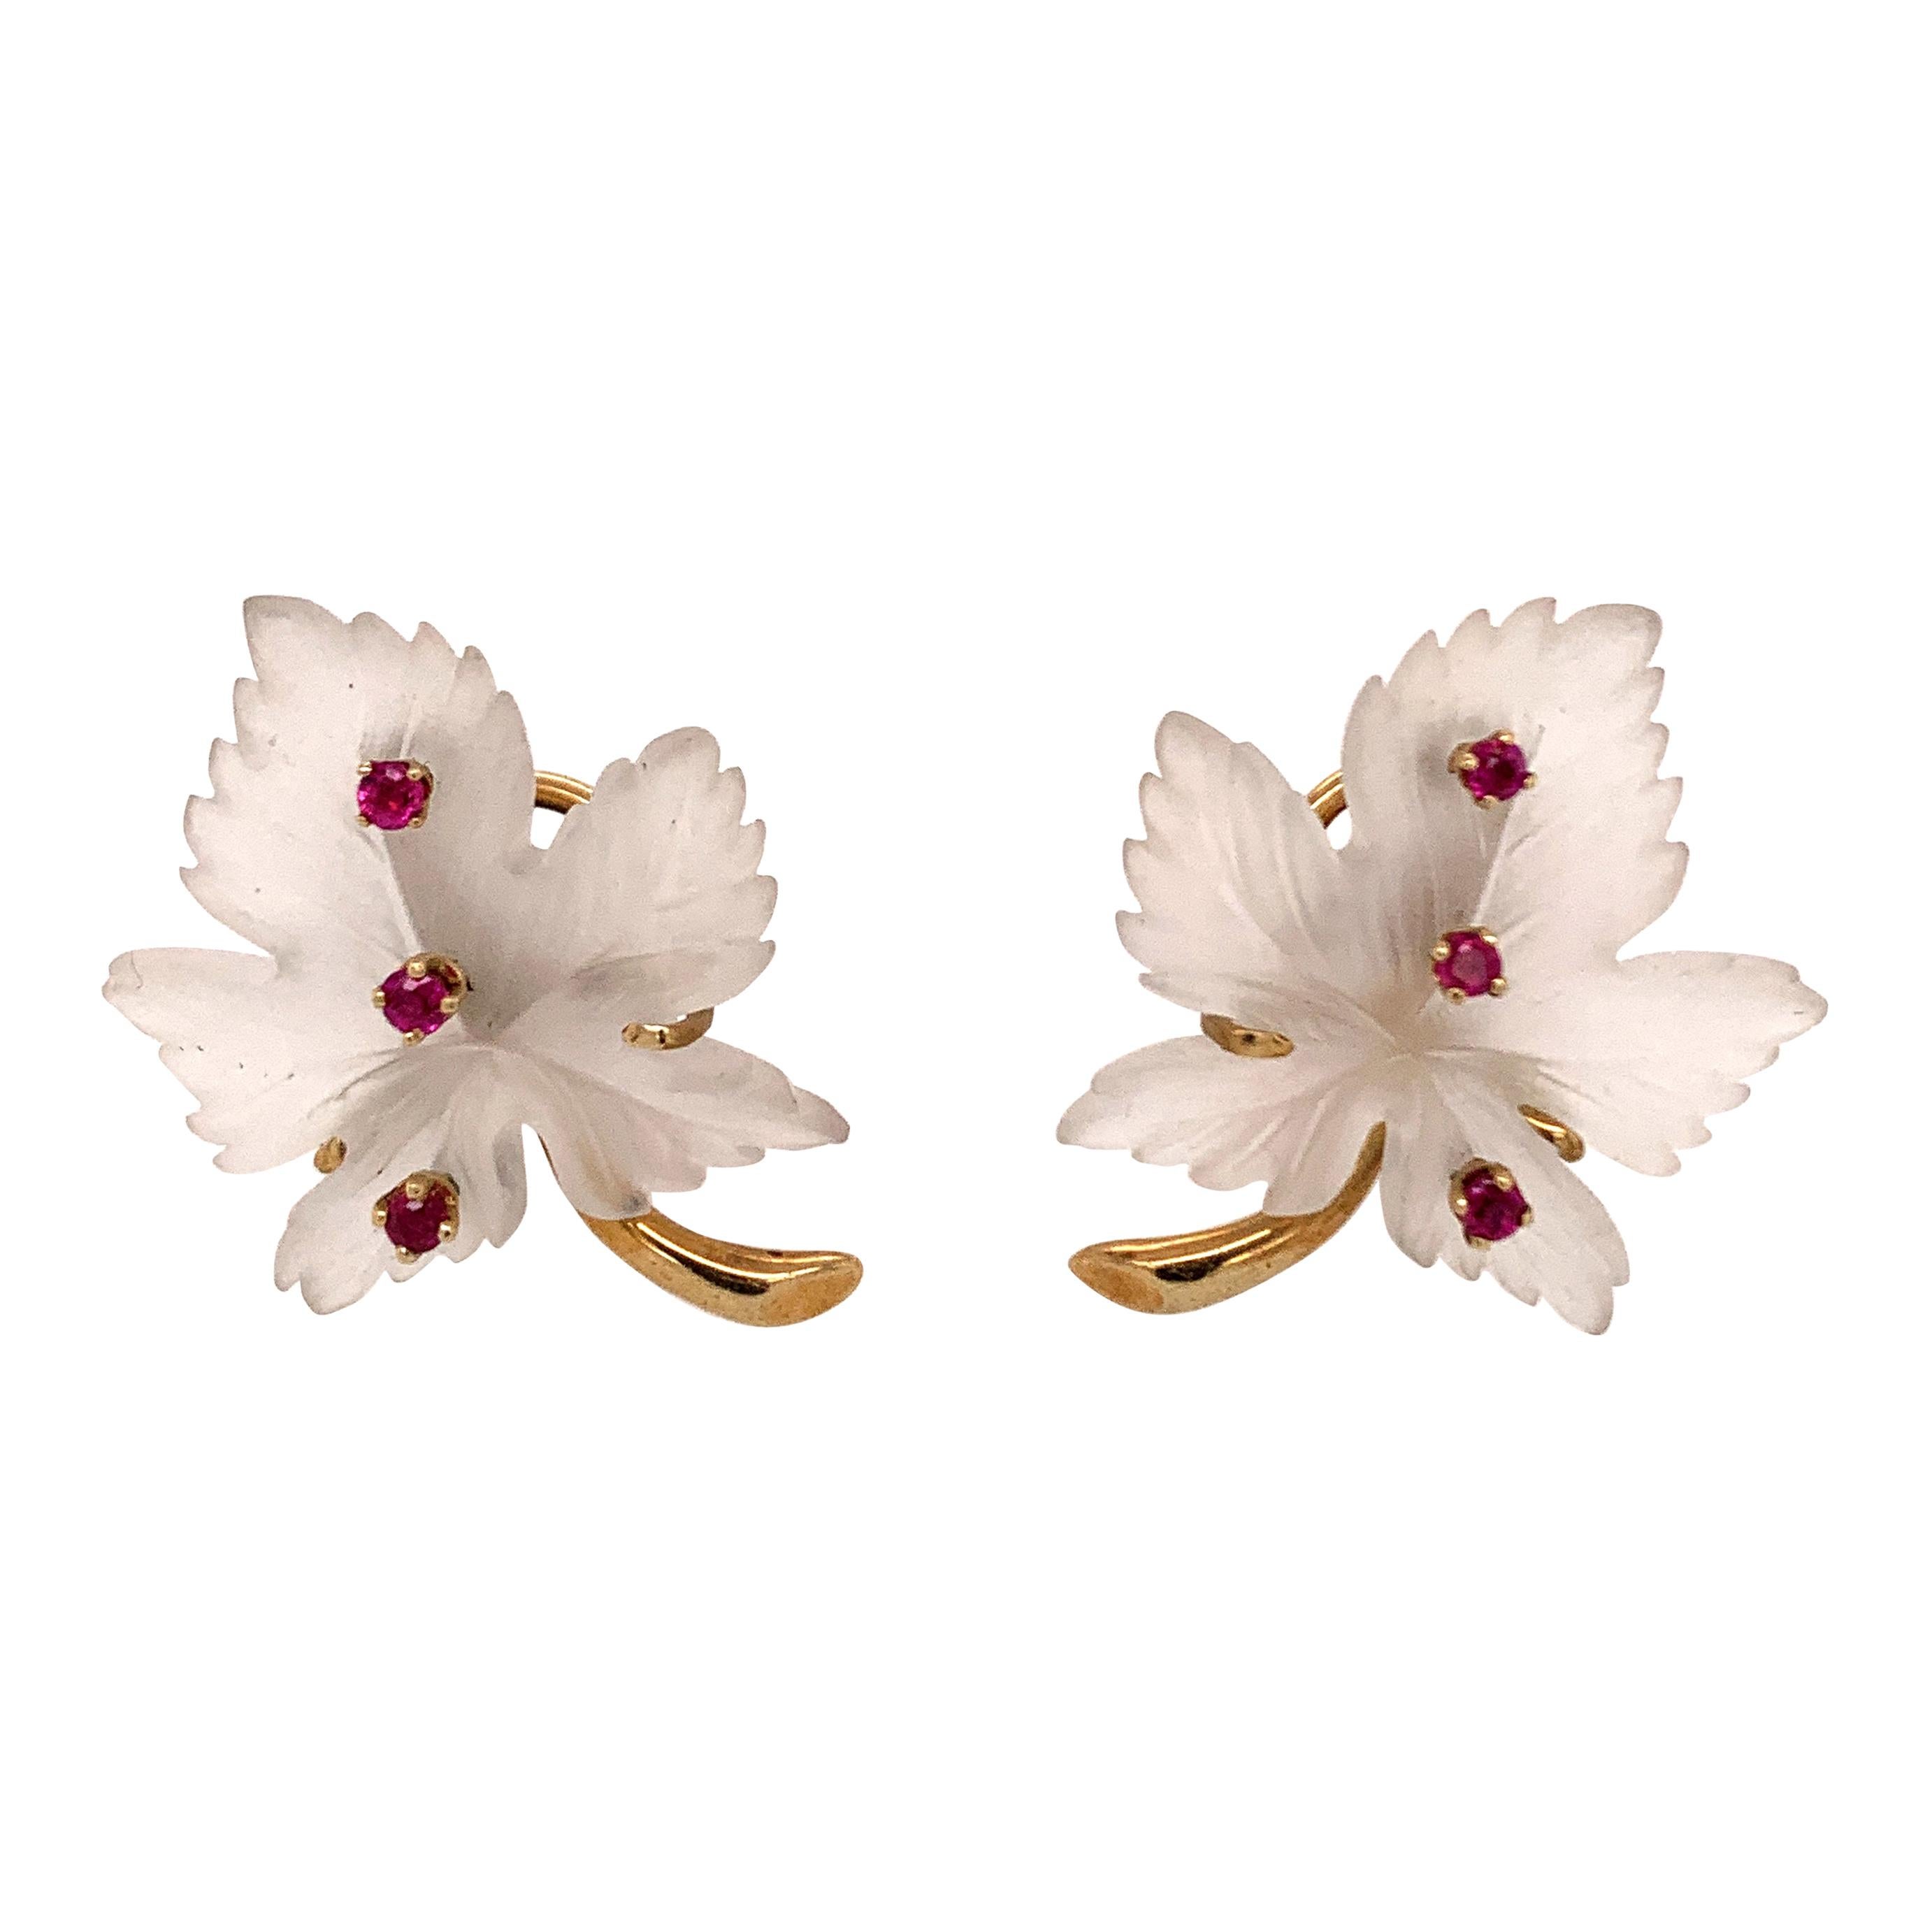 Lovely Rock Crystal Gold and Ruby Leaf Earrings